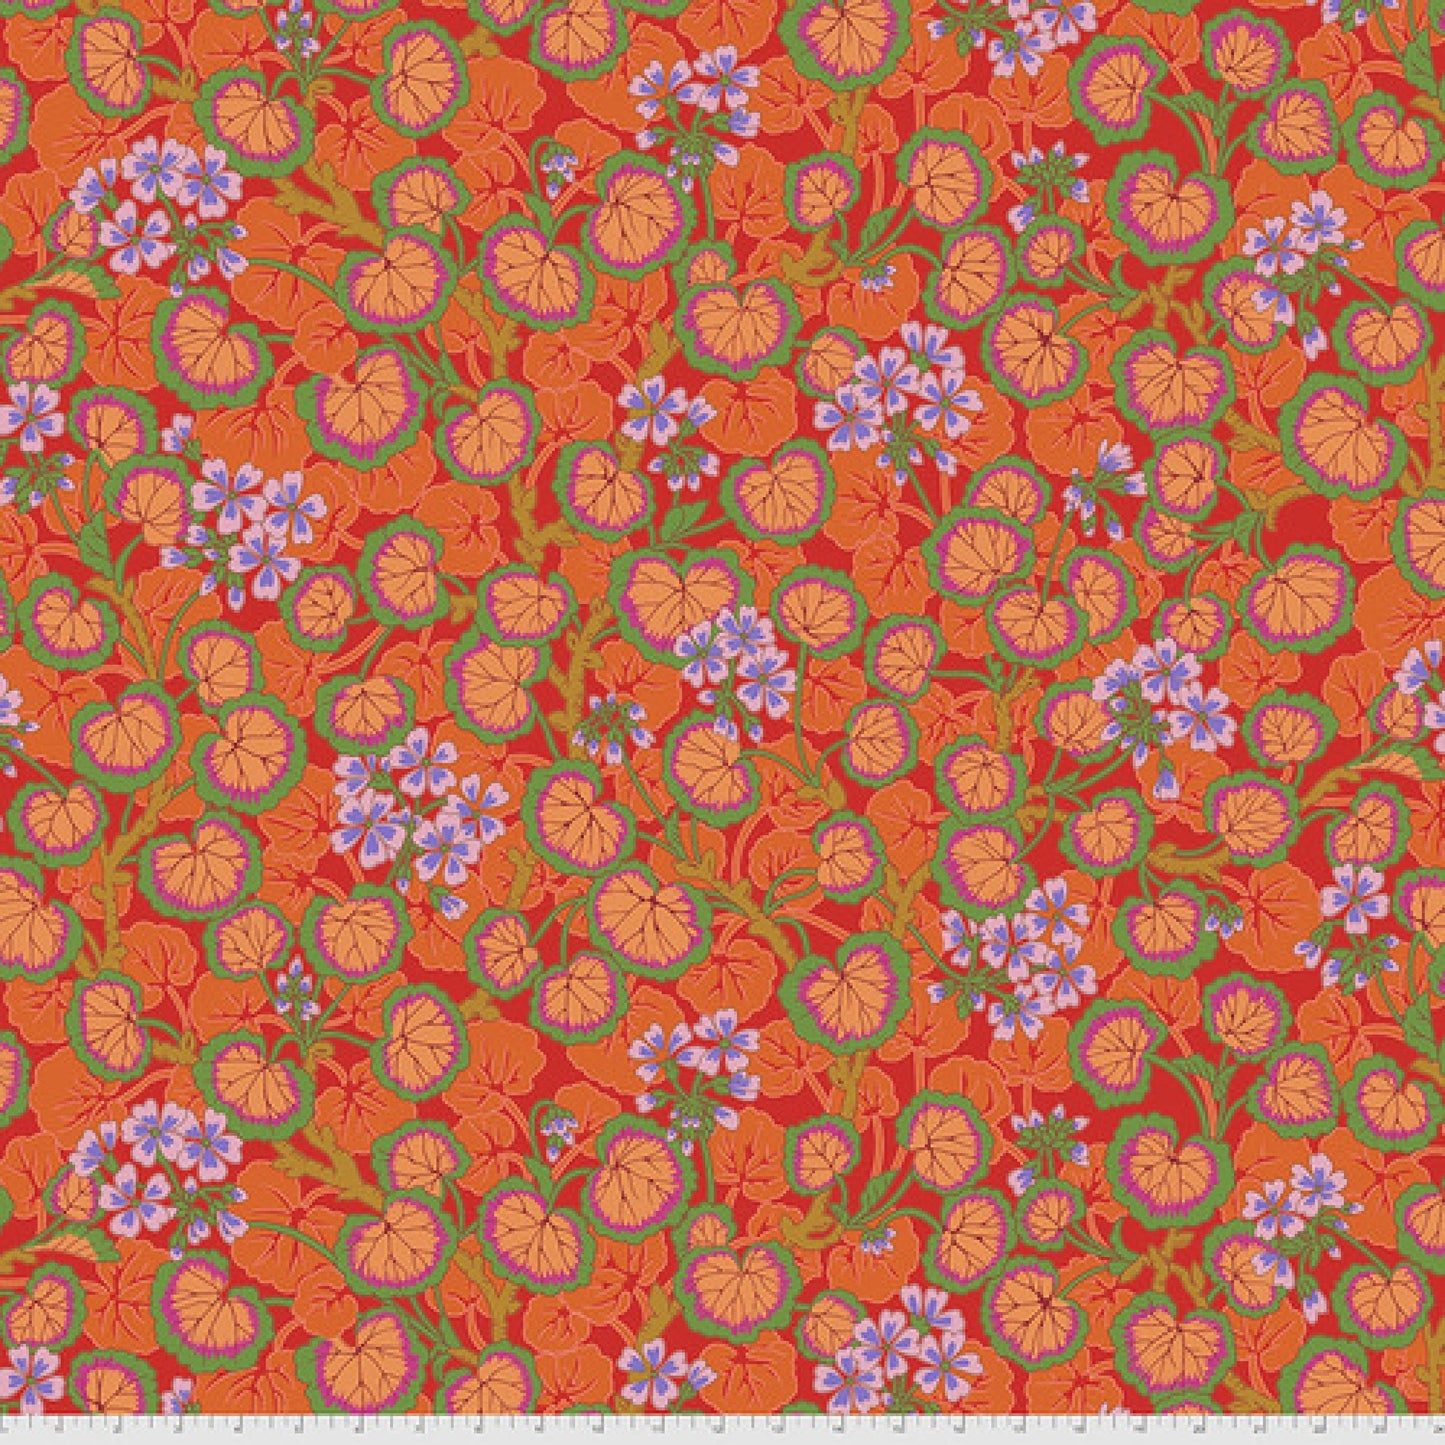 Climbing Geraniums Red Kaffe Fassett PWPJ110 Red 100% Quilters Cotton August 2021 Fabric Fetish